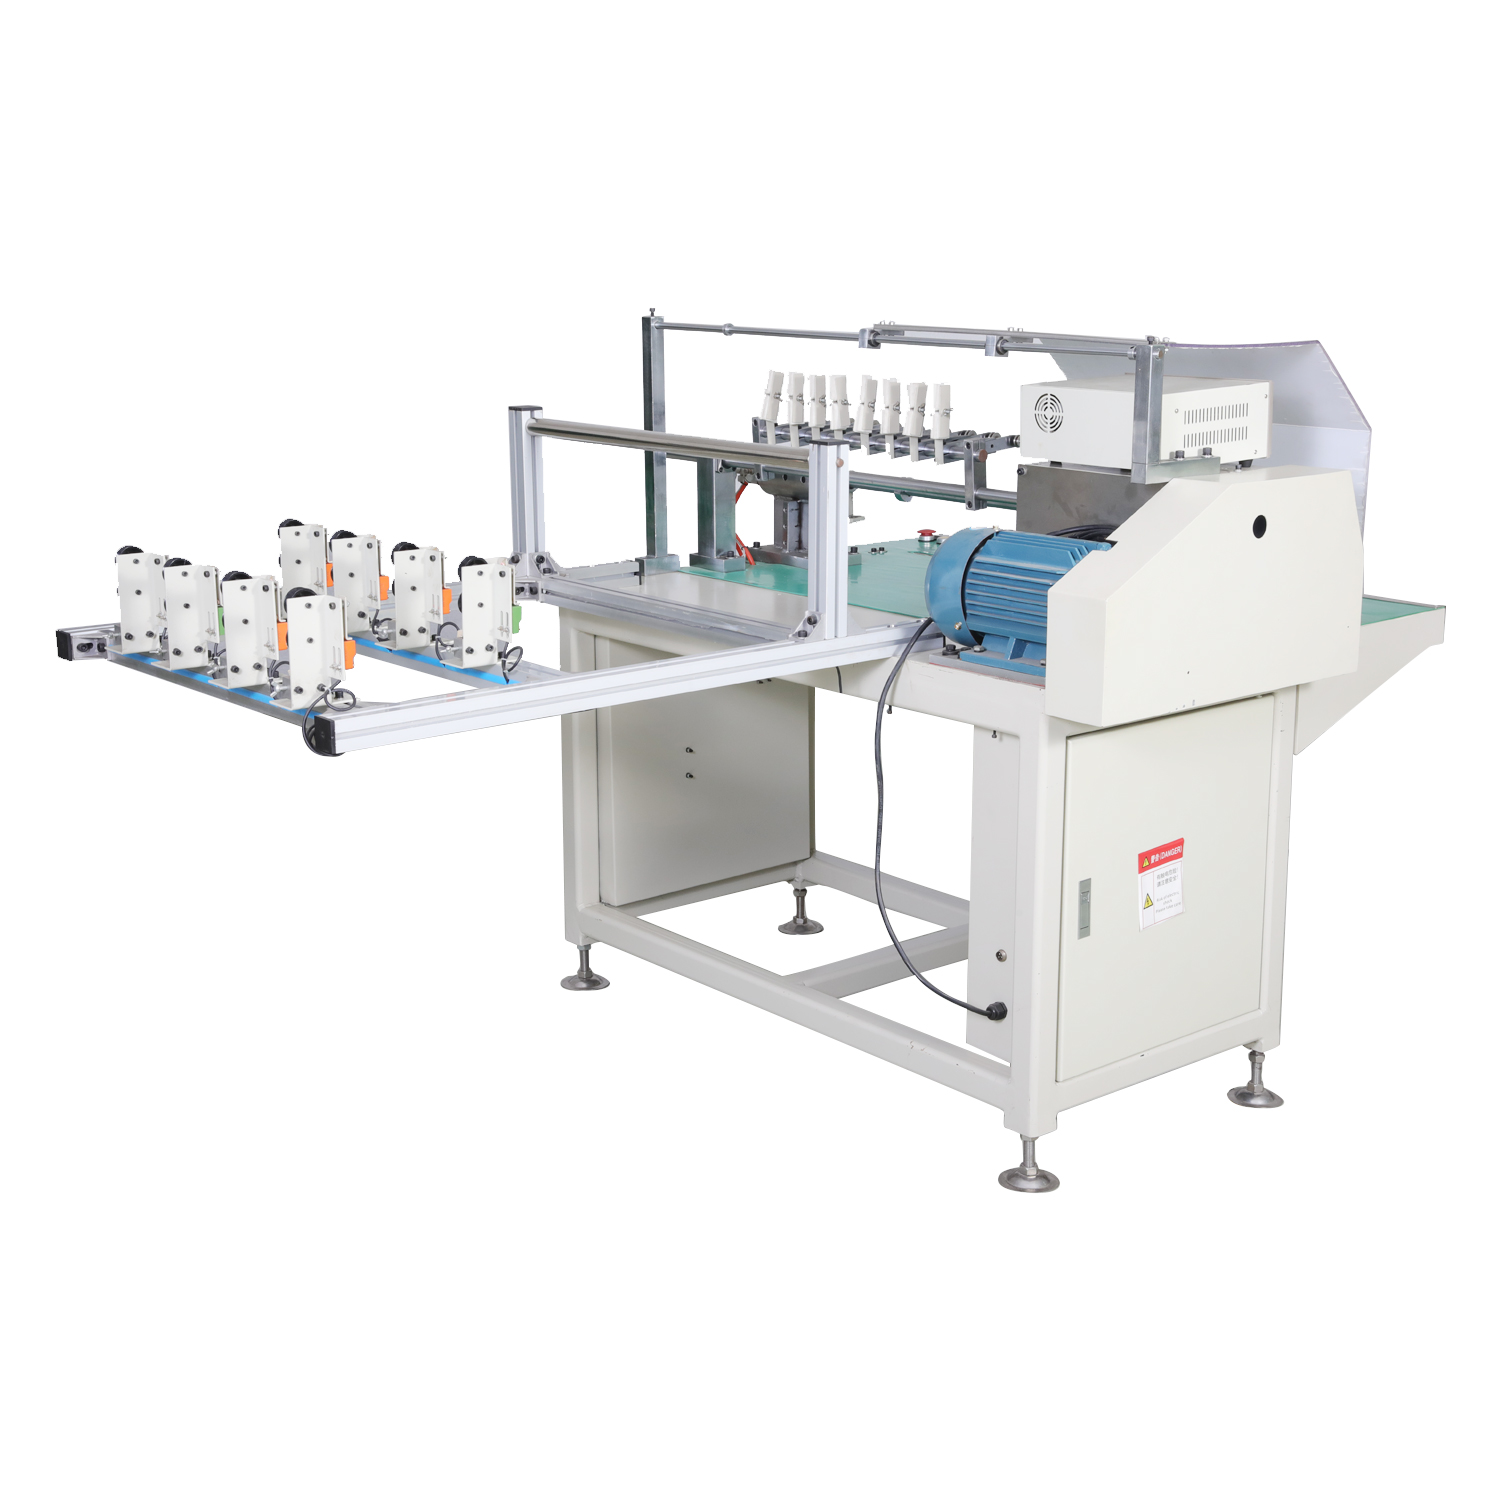 Simply stator coil winding machine (1)